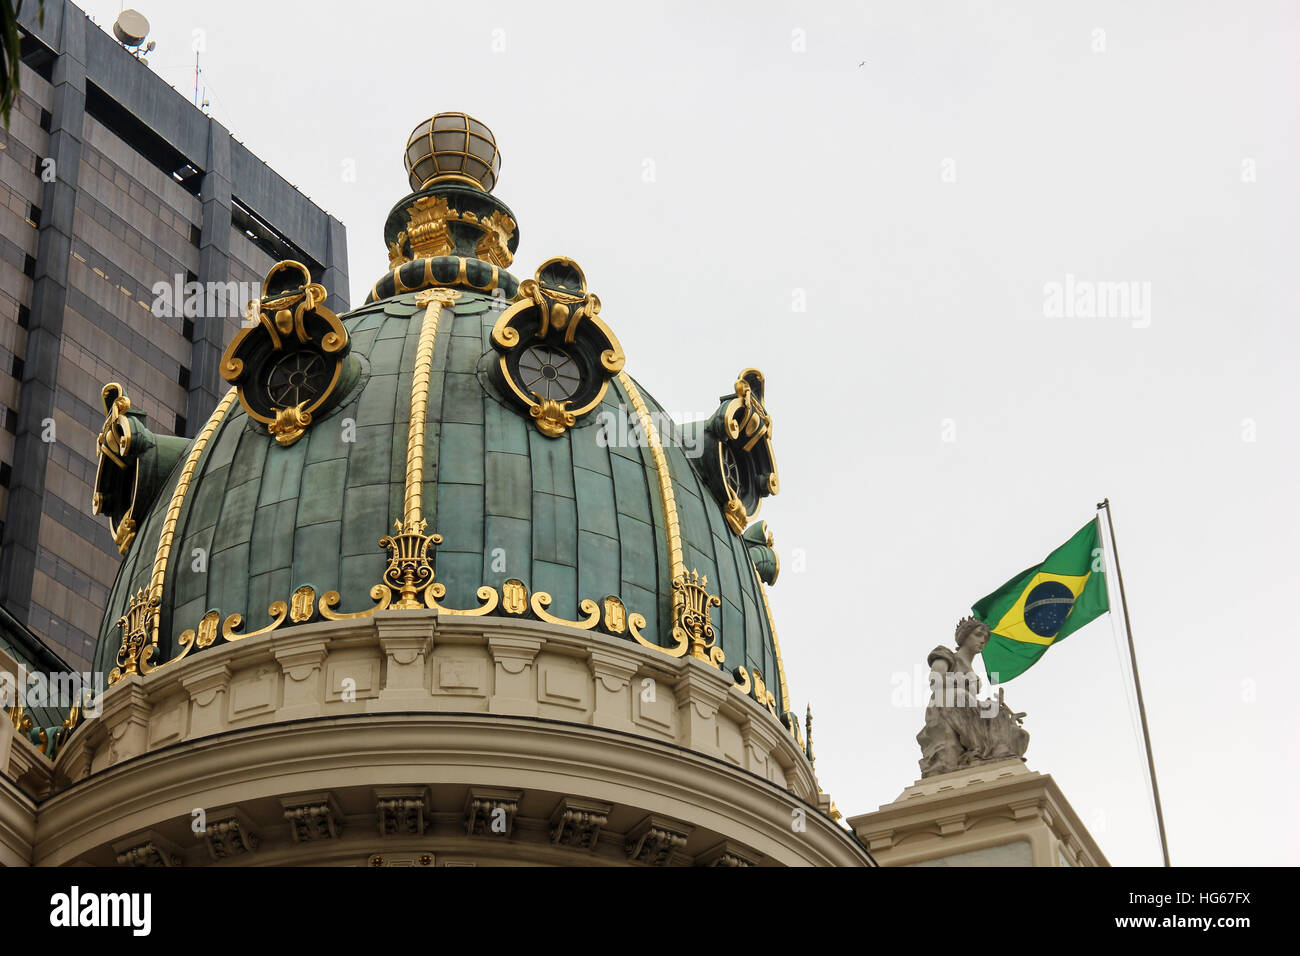 Architectural detail of the Municipal Theater of Rio de Janeiro, Brazil. The historic building, located in downtown Rio, opened in 1909. In this image Stock Photo